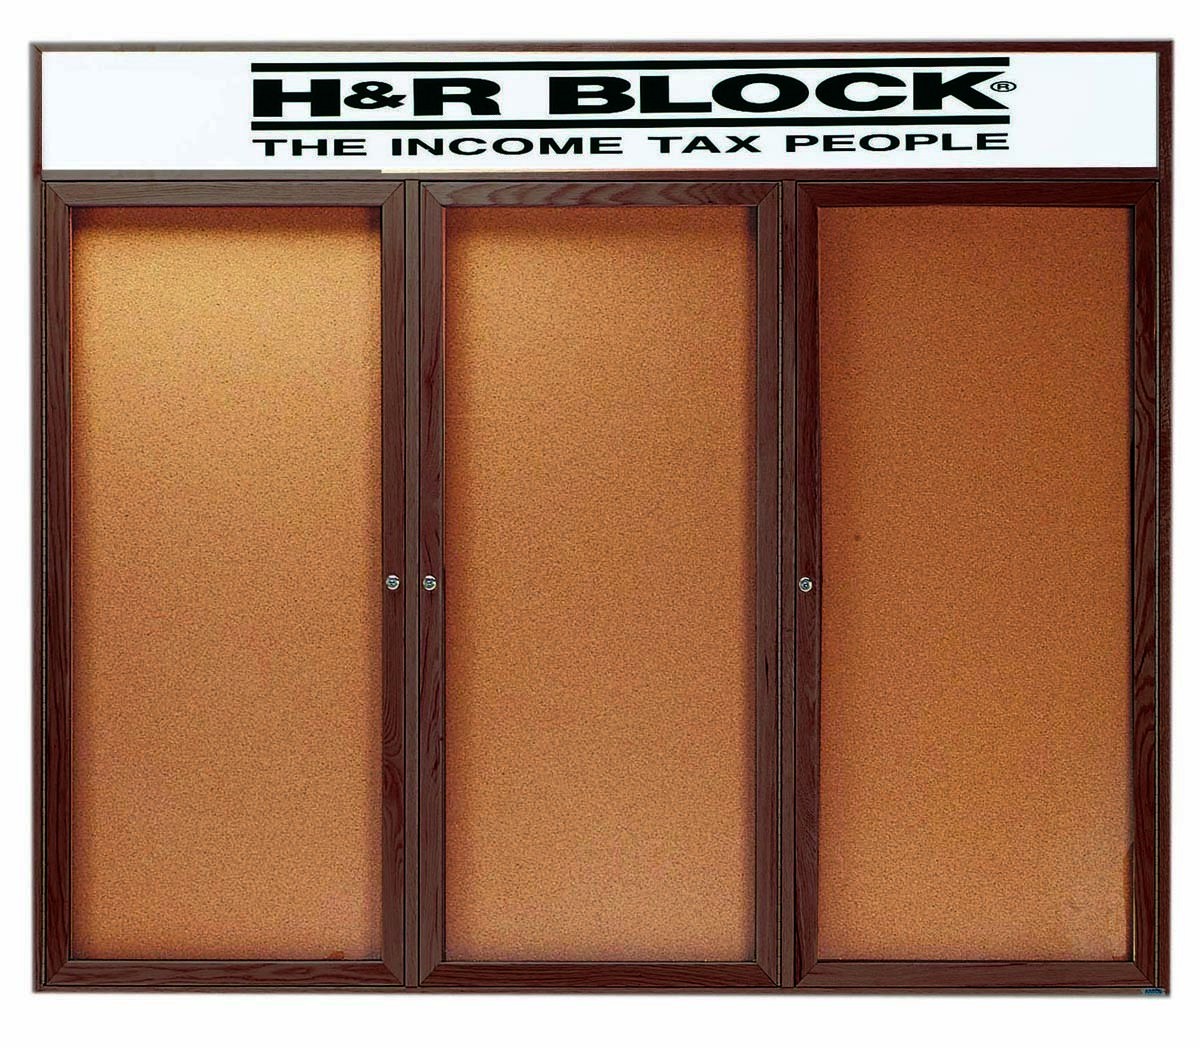 Aarco Products WBC4872-3RH 3-Door Enclosed Bulletin Board with Walnut Finish and Header, 72"W x 48"H